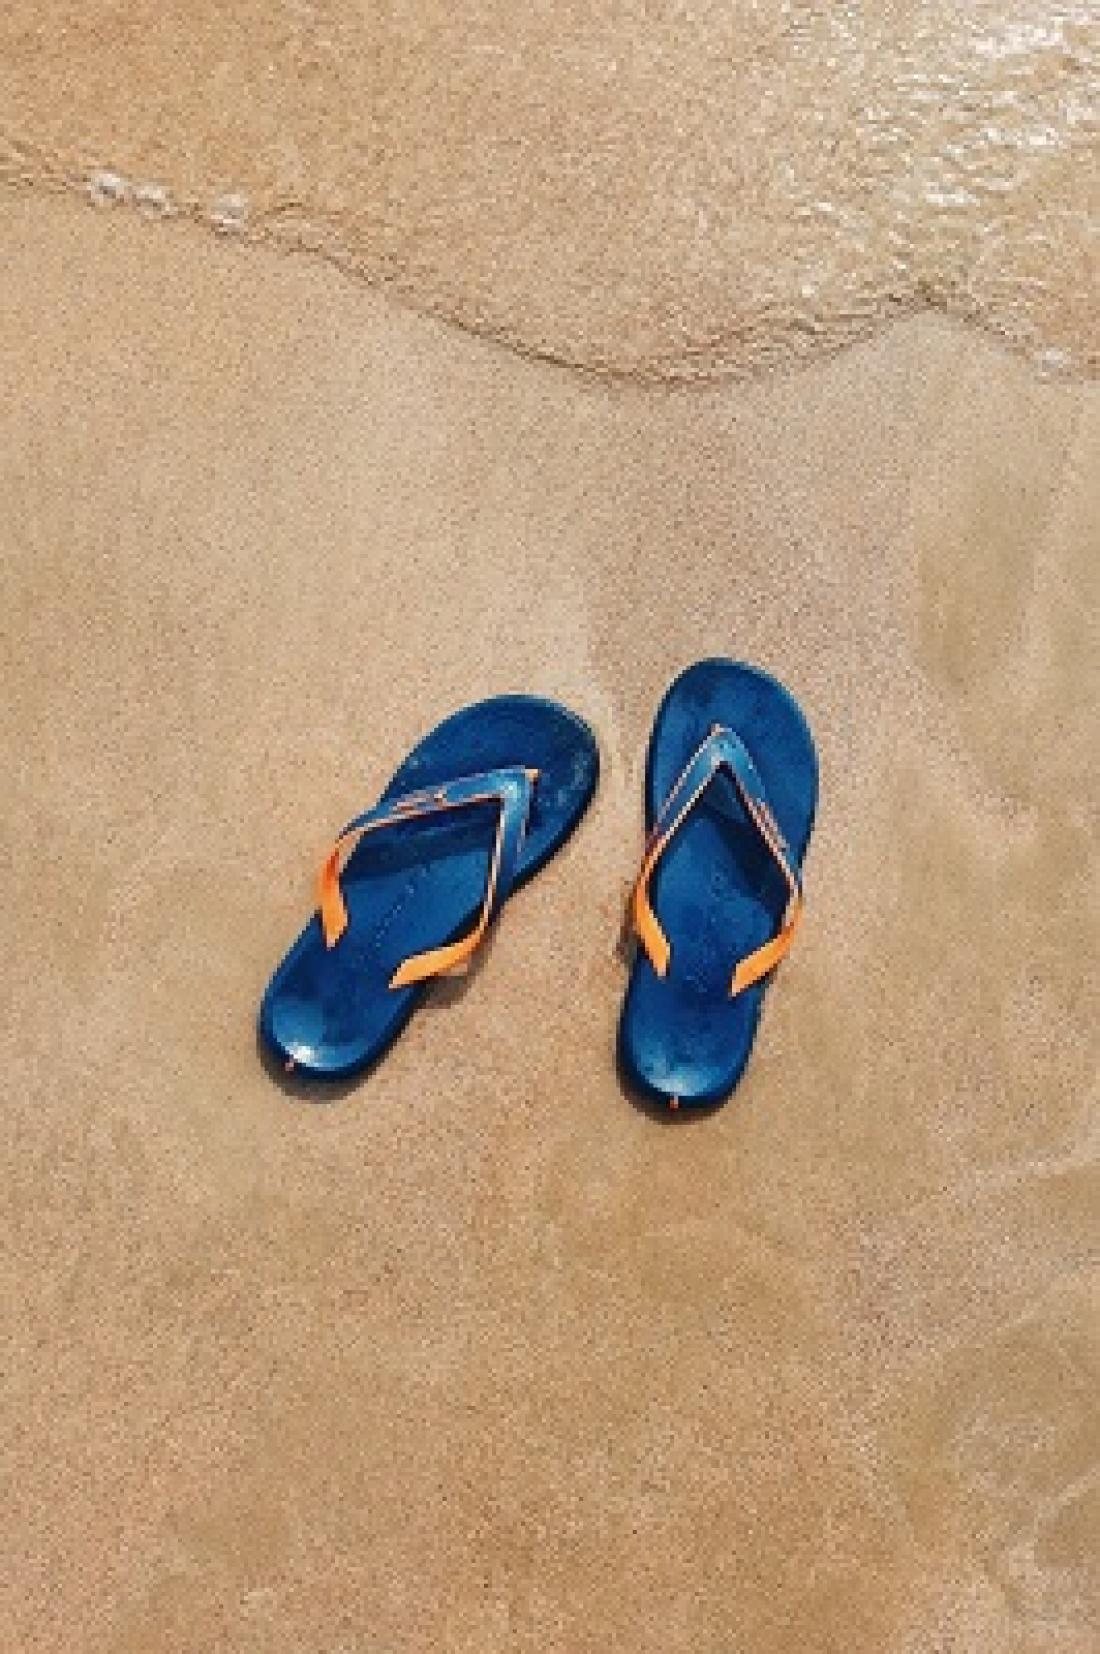 Blue flip flops on the sand with water approaching